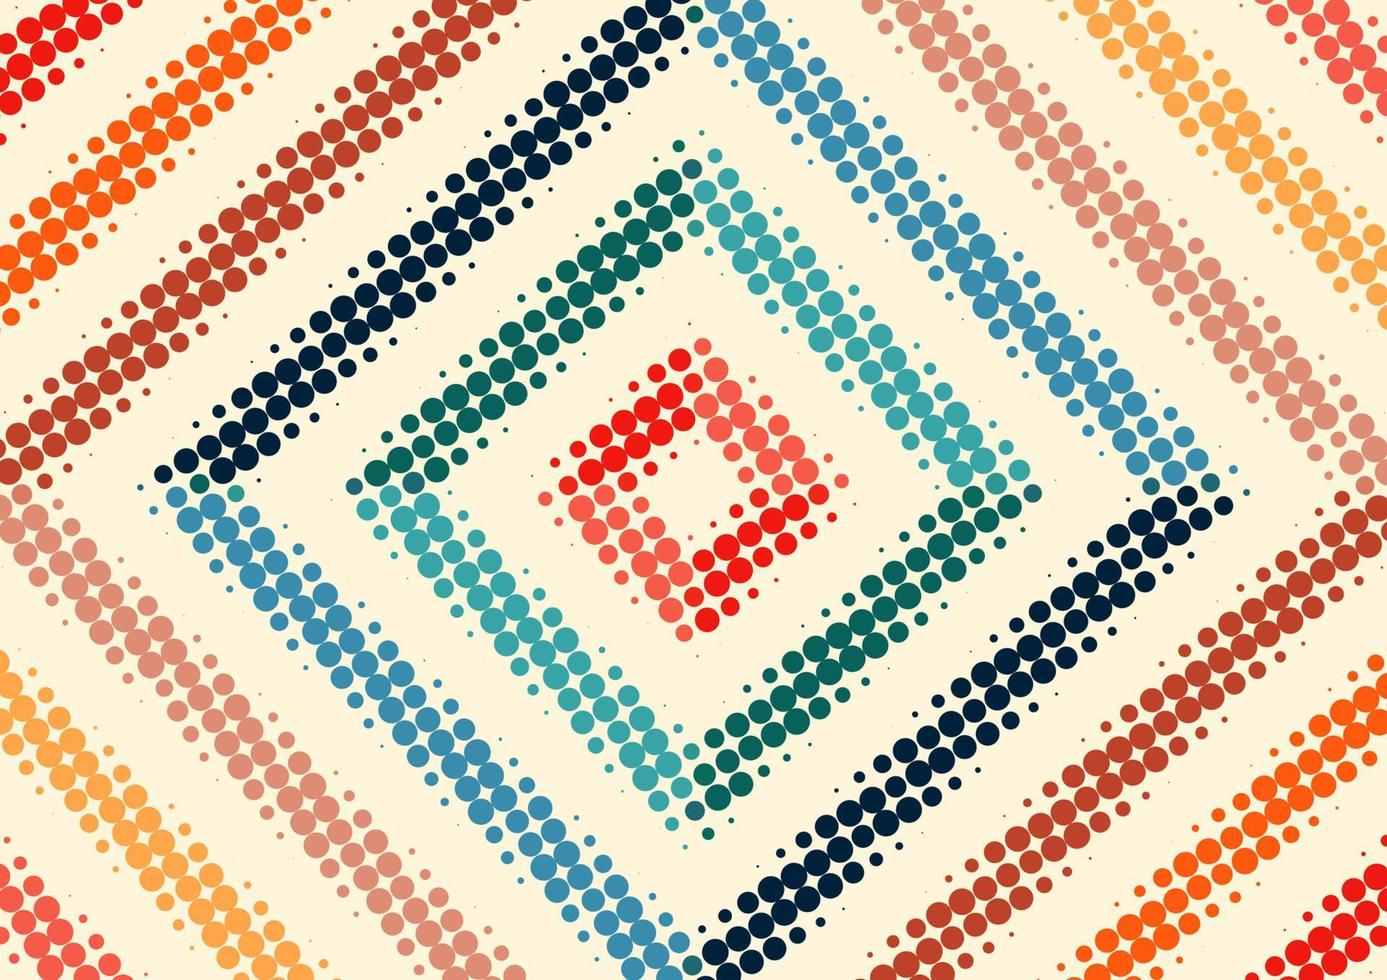 Vintage retro colorful with halftone dots background vector